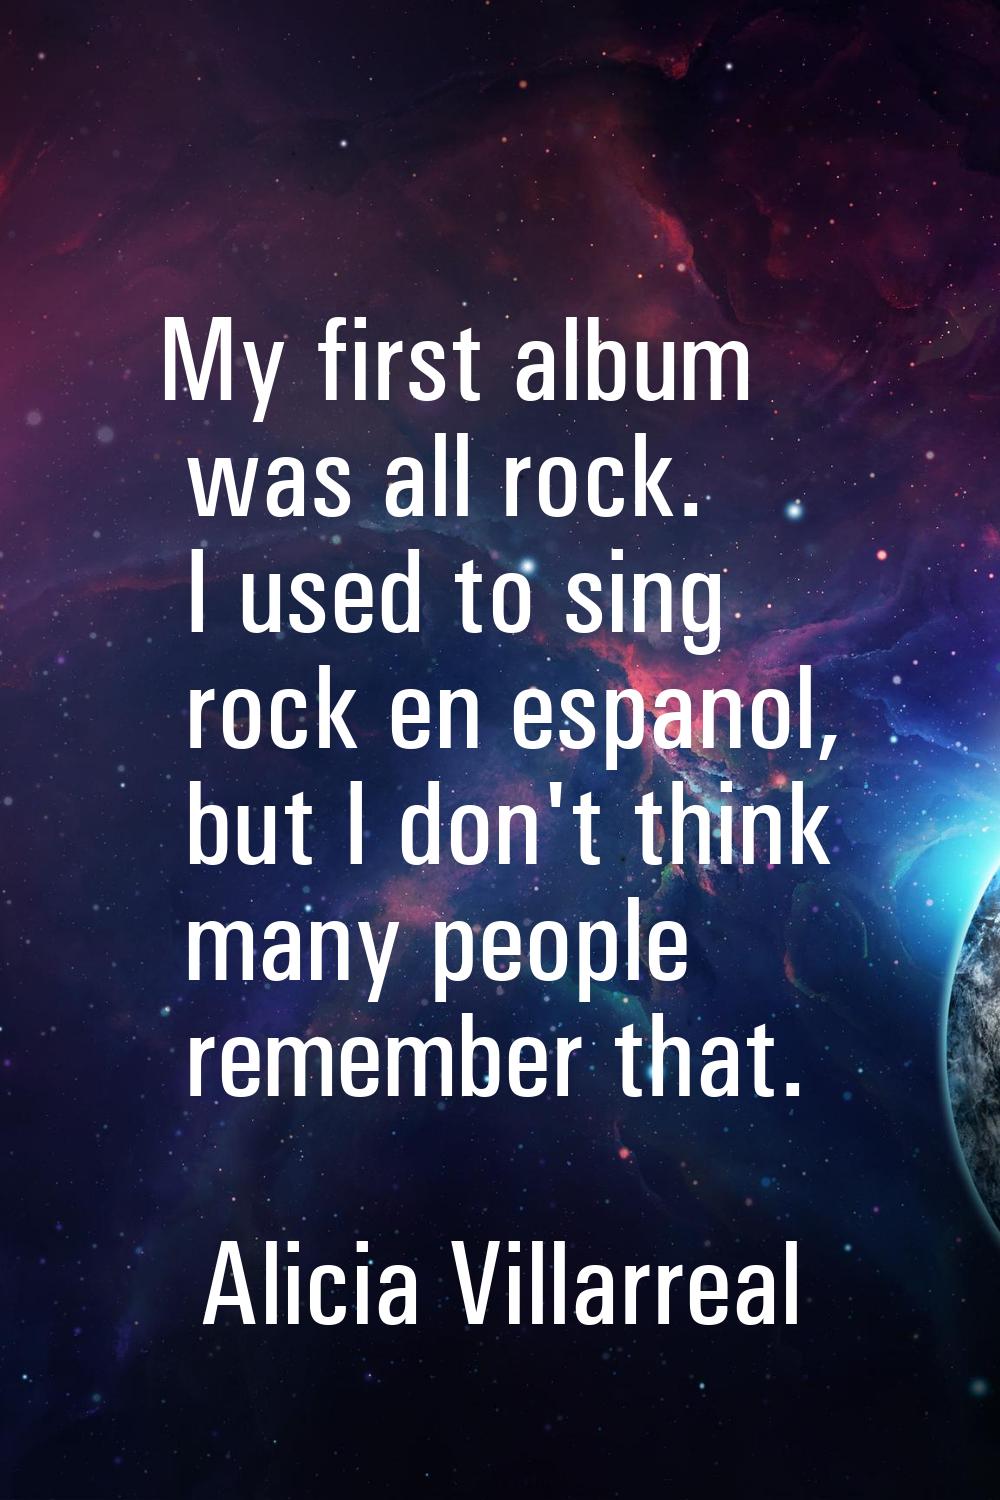 My first album was all rock. I used to sing rock en espanol, but I don't think many people remember